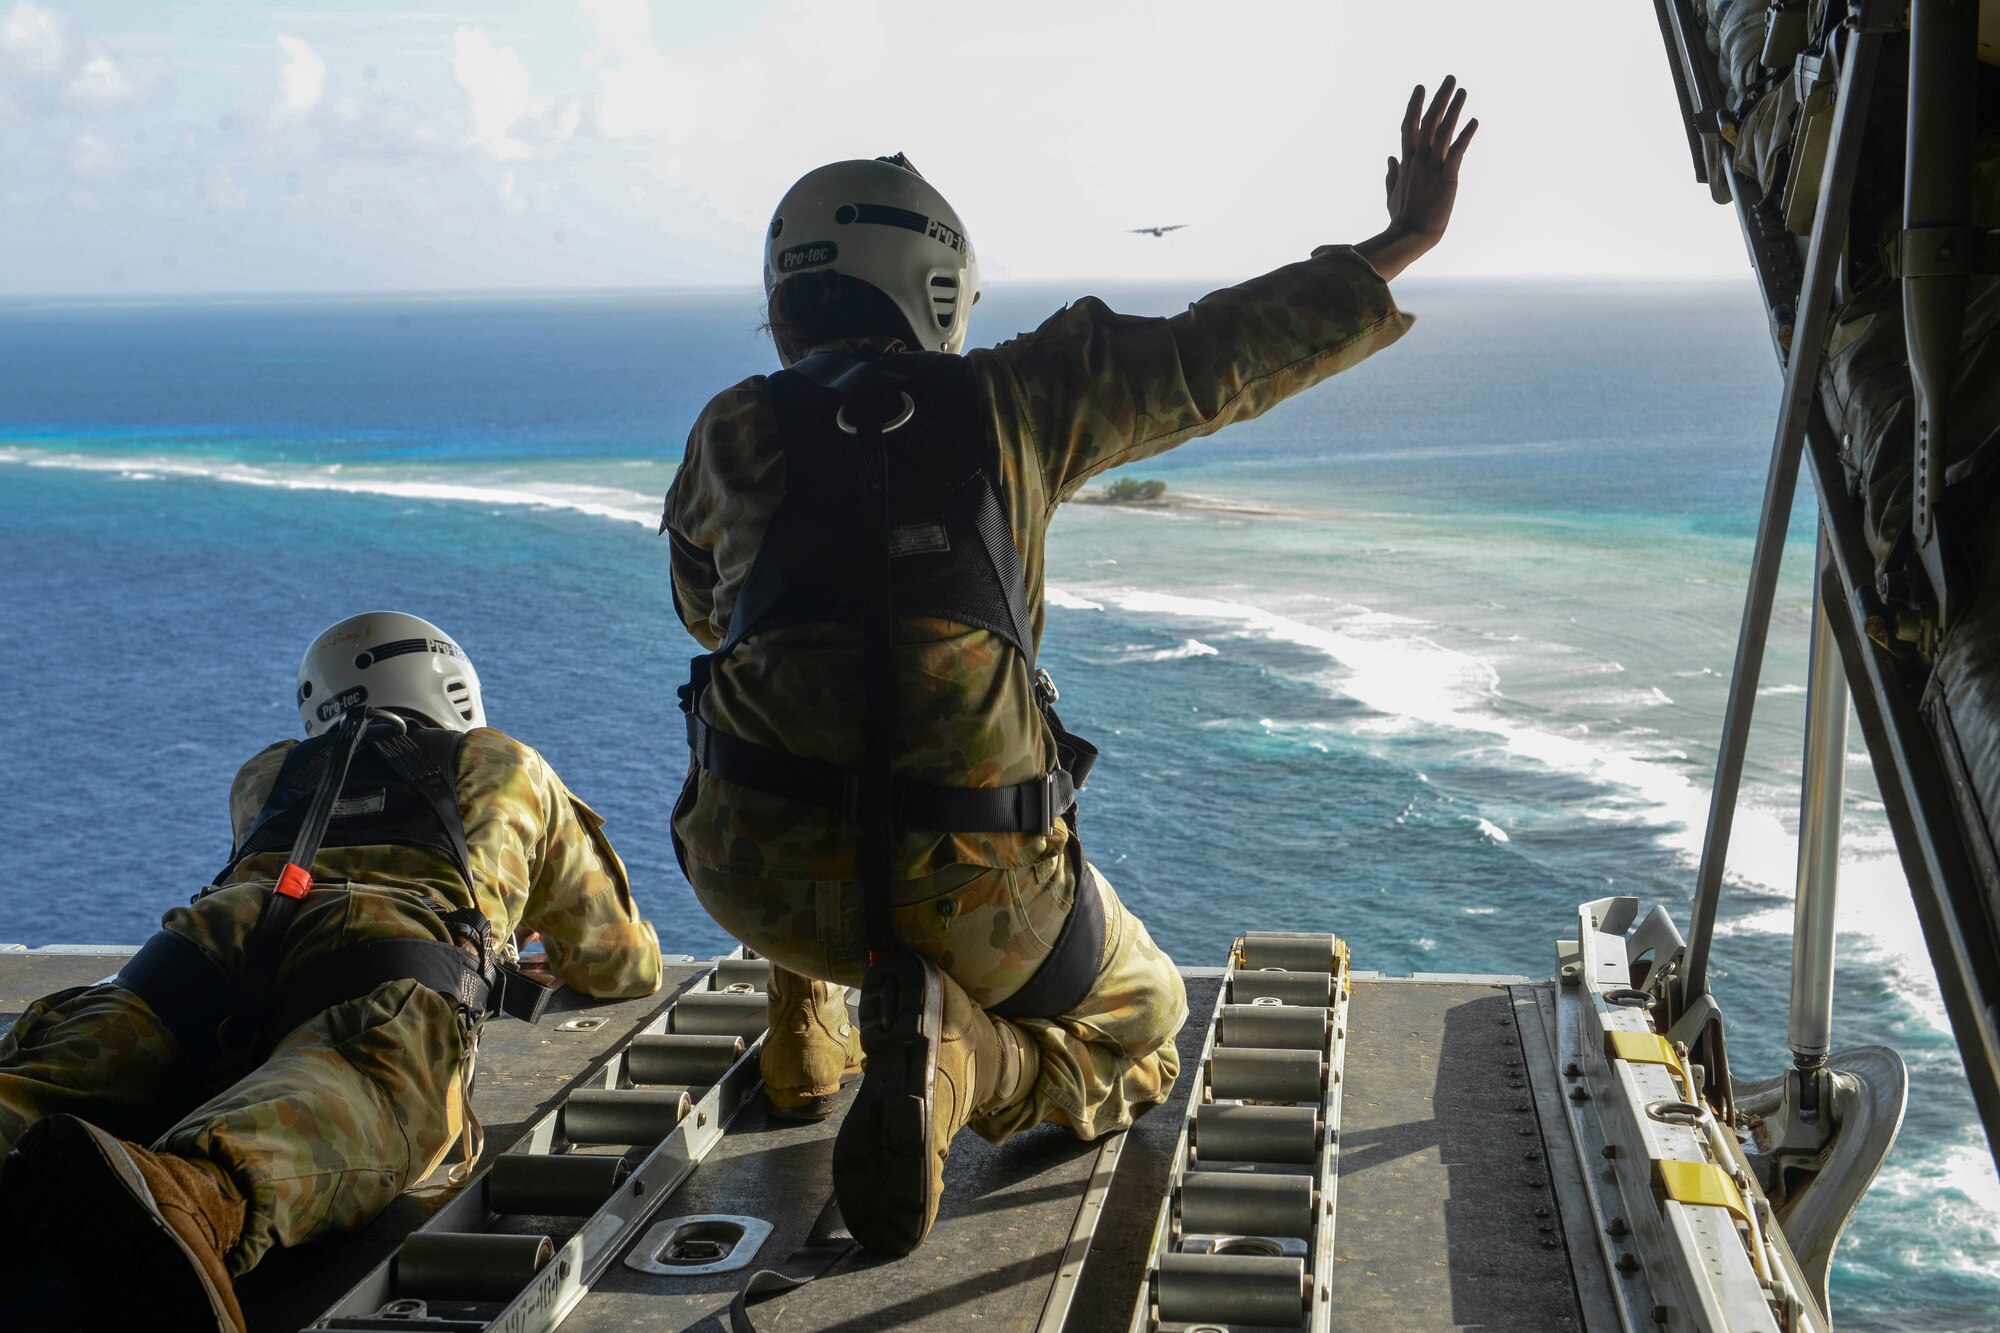 Australian Army Cpl. Teome Matamua and Sgt. Phillip McIllvaney, 176th Air Dispatch Squadron loadmasters, wave to islanders in the Federated States of Micronesia from the back of a C-130J Super Hercules after delivering donated goods and critical supplies to the islanders Dec. 8, 2015, during Operation Christmas Drop. The 2015 Christmas Drop missions marked the first time the event included trilateral air support from the Japan Air Self-Defense Force and RAAF. (U.S. Air Force photo/Staff Sgt. Katrina Brisbin)